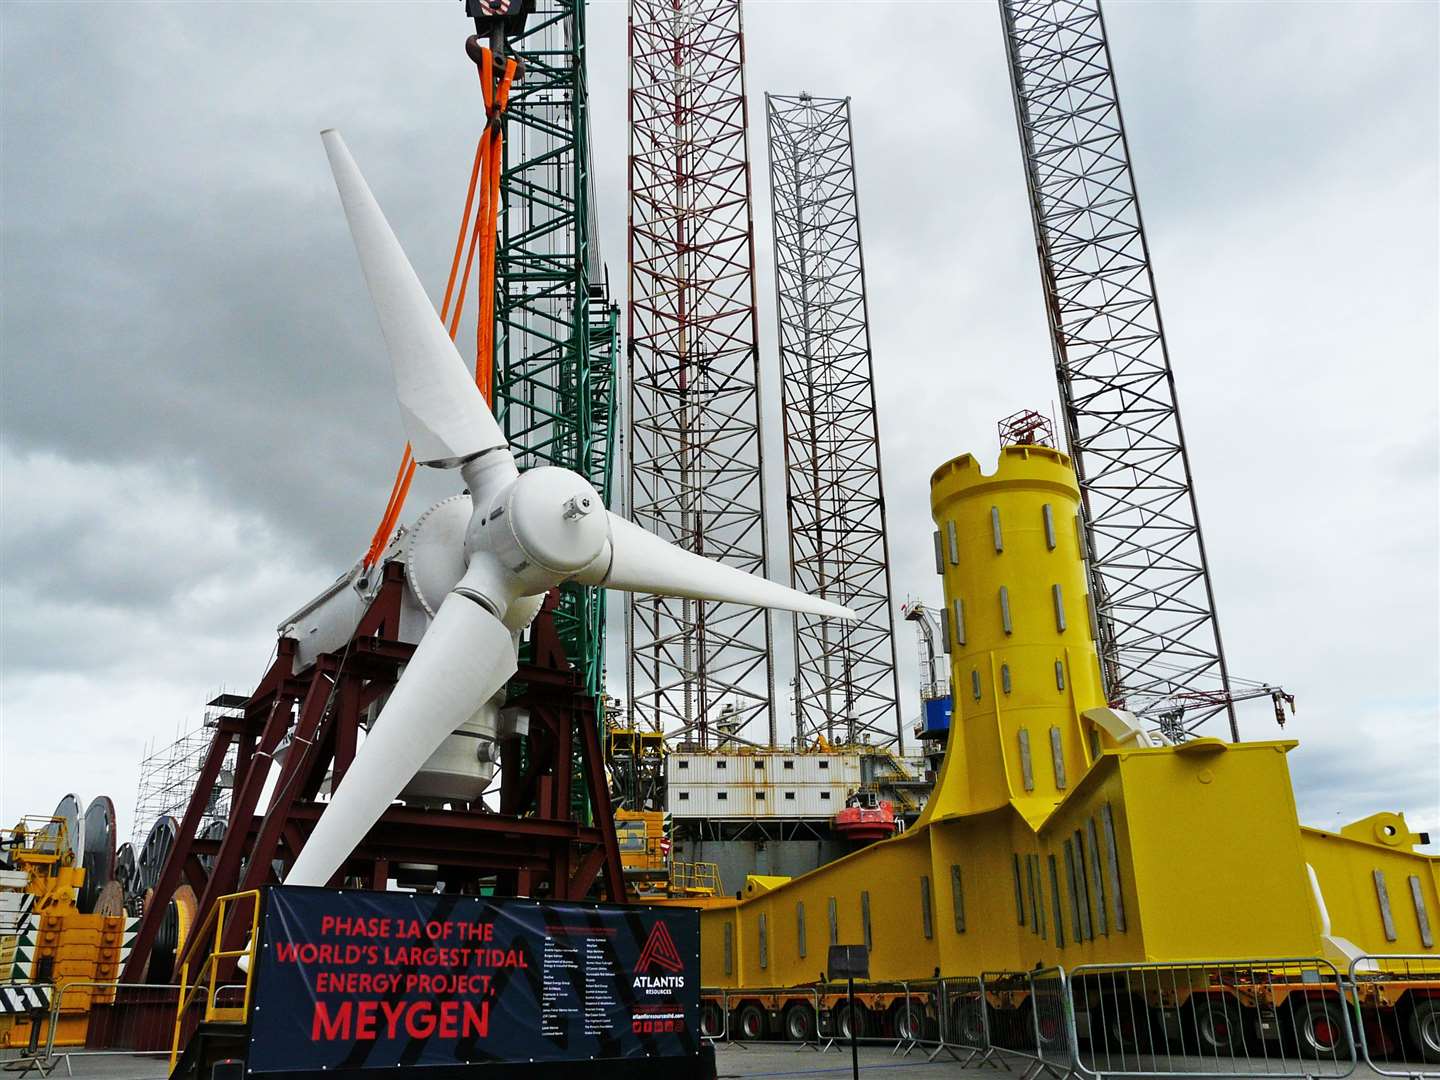 One of the MeyGen turbines at Nigg Energy Park in September 2016, prior to installation in the Pentland Firth. Picture: Alan Hendry